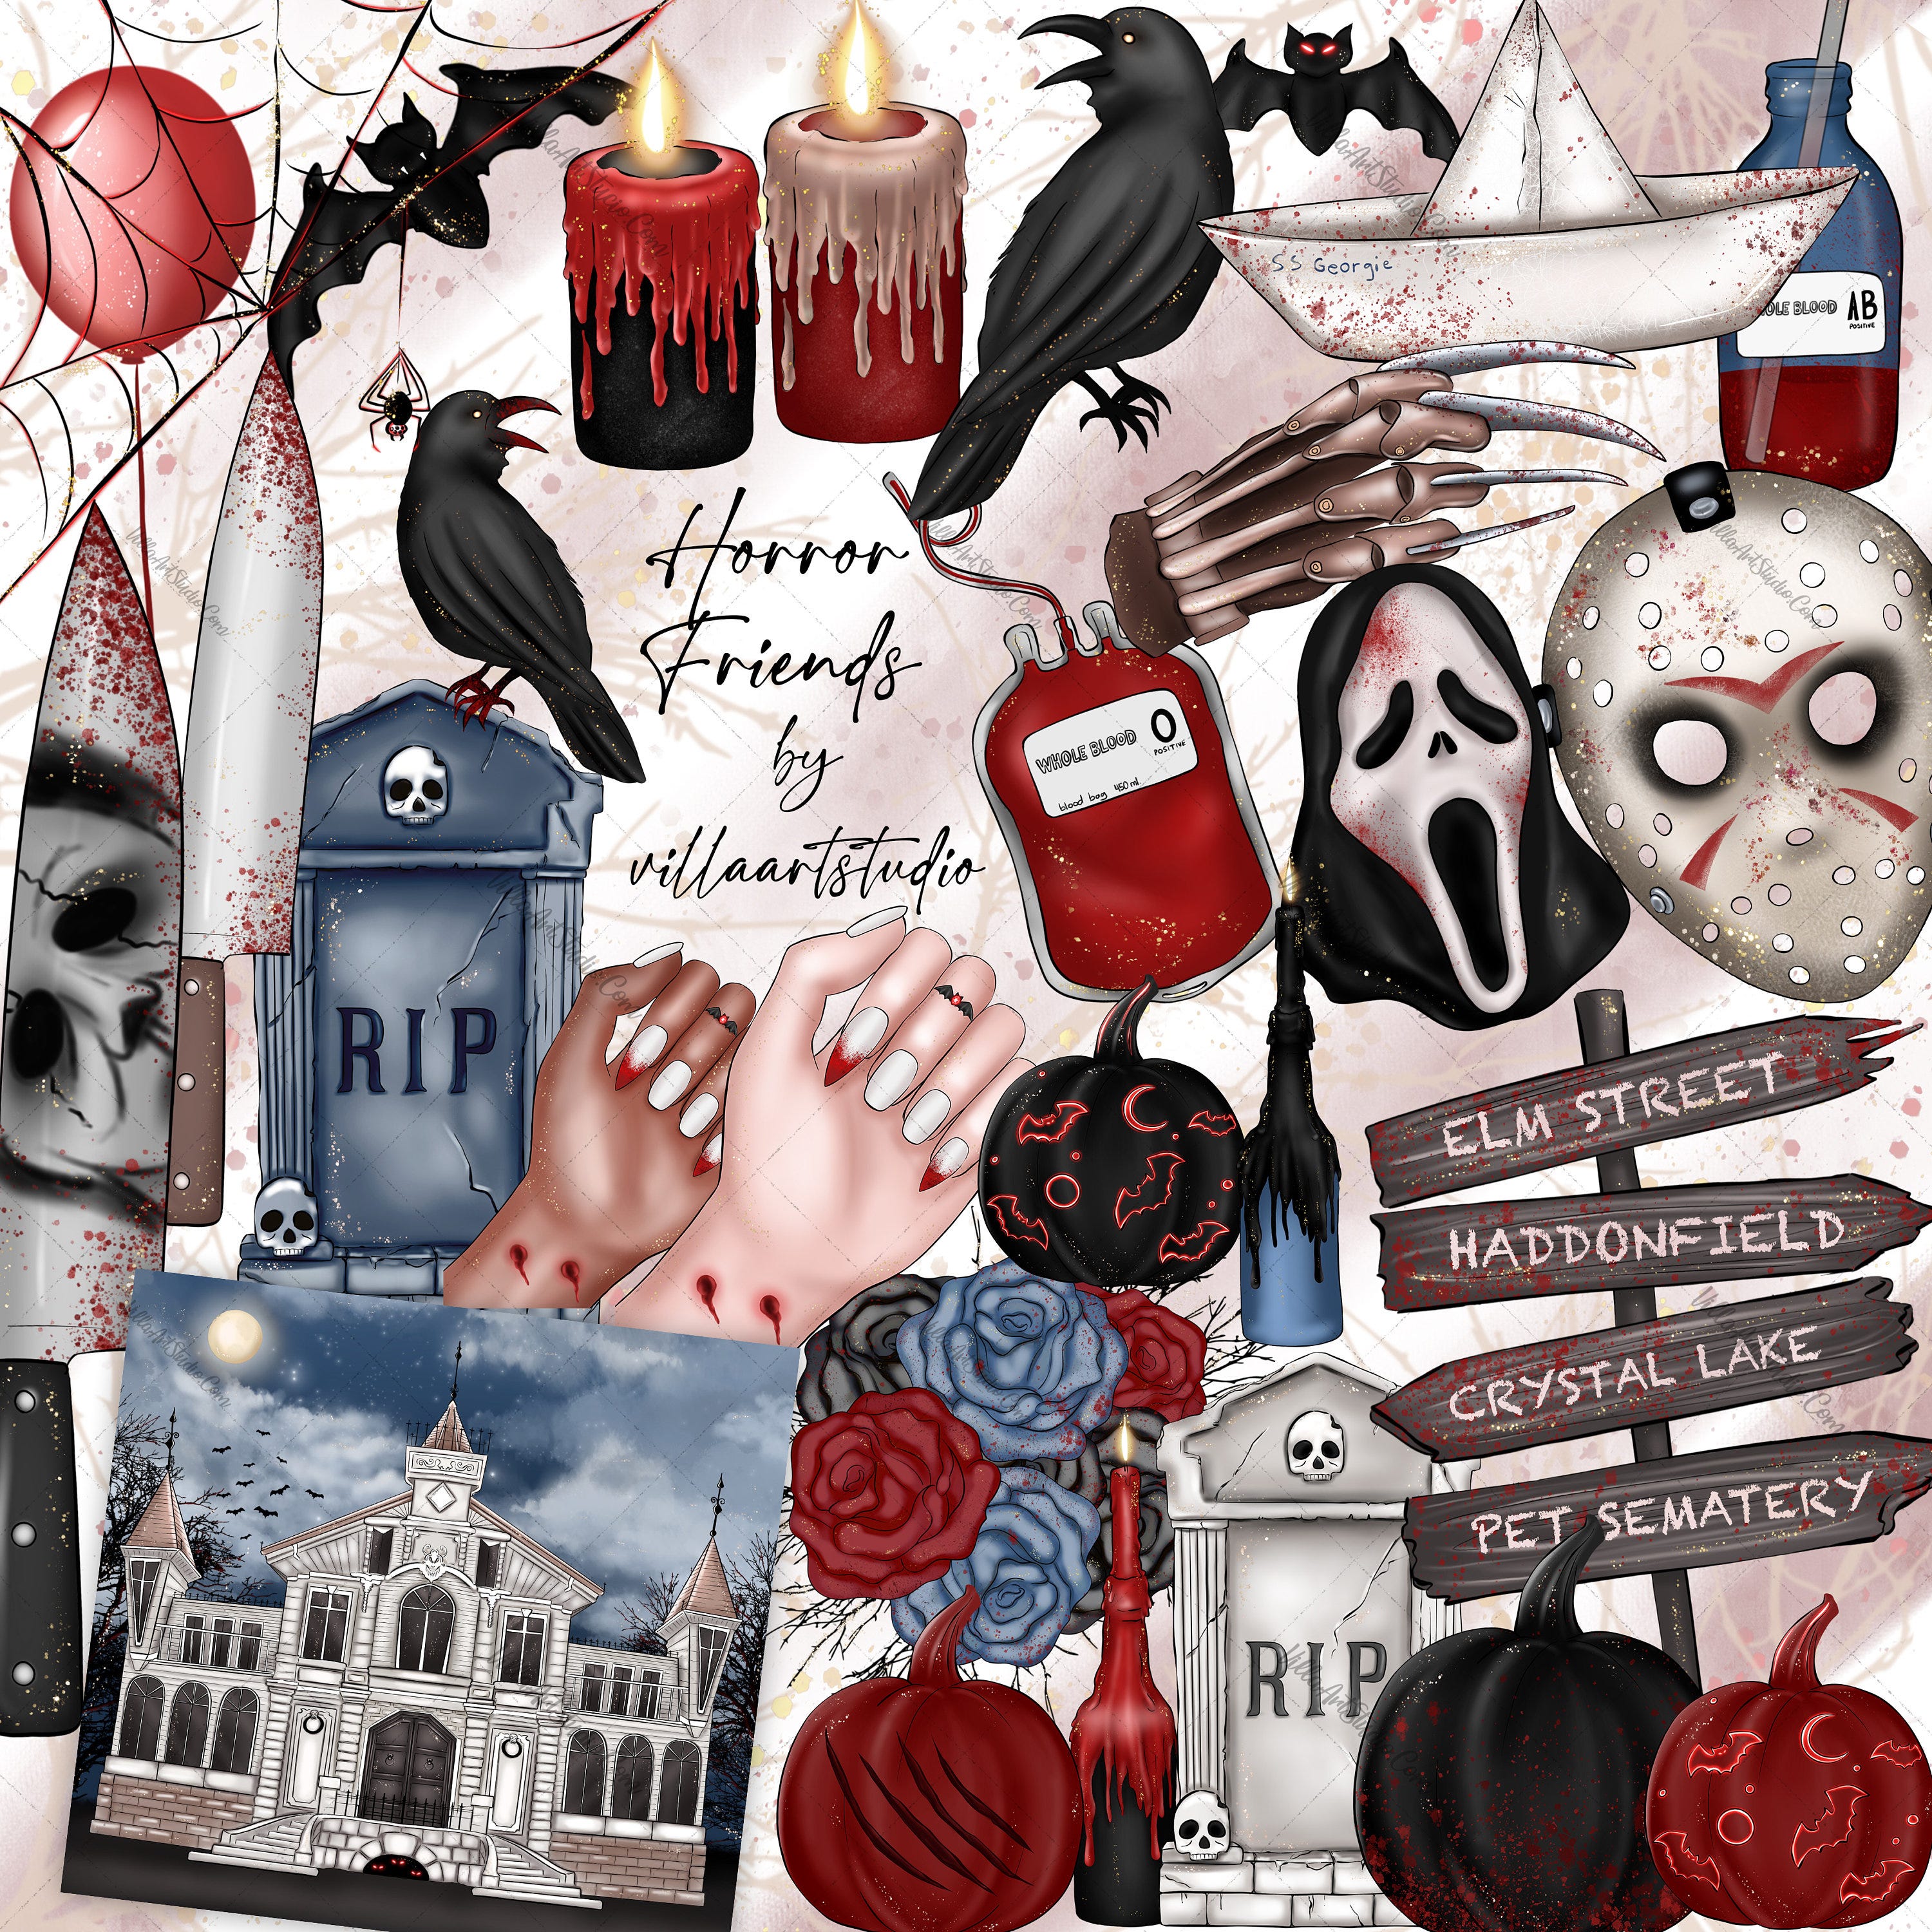 Horror Friends clipart and spooky Scene haunted clipart Happy Halloween Scary Costume Nightmare halloween clipart planner art Spooky scary